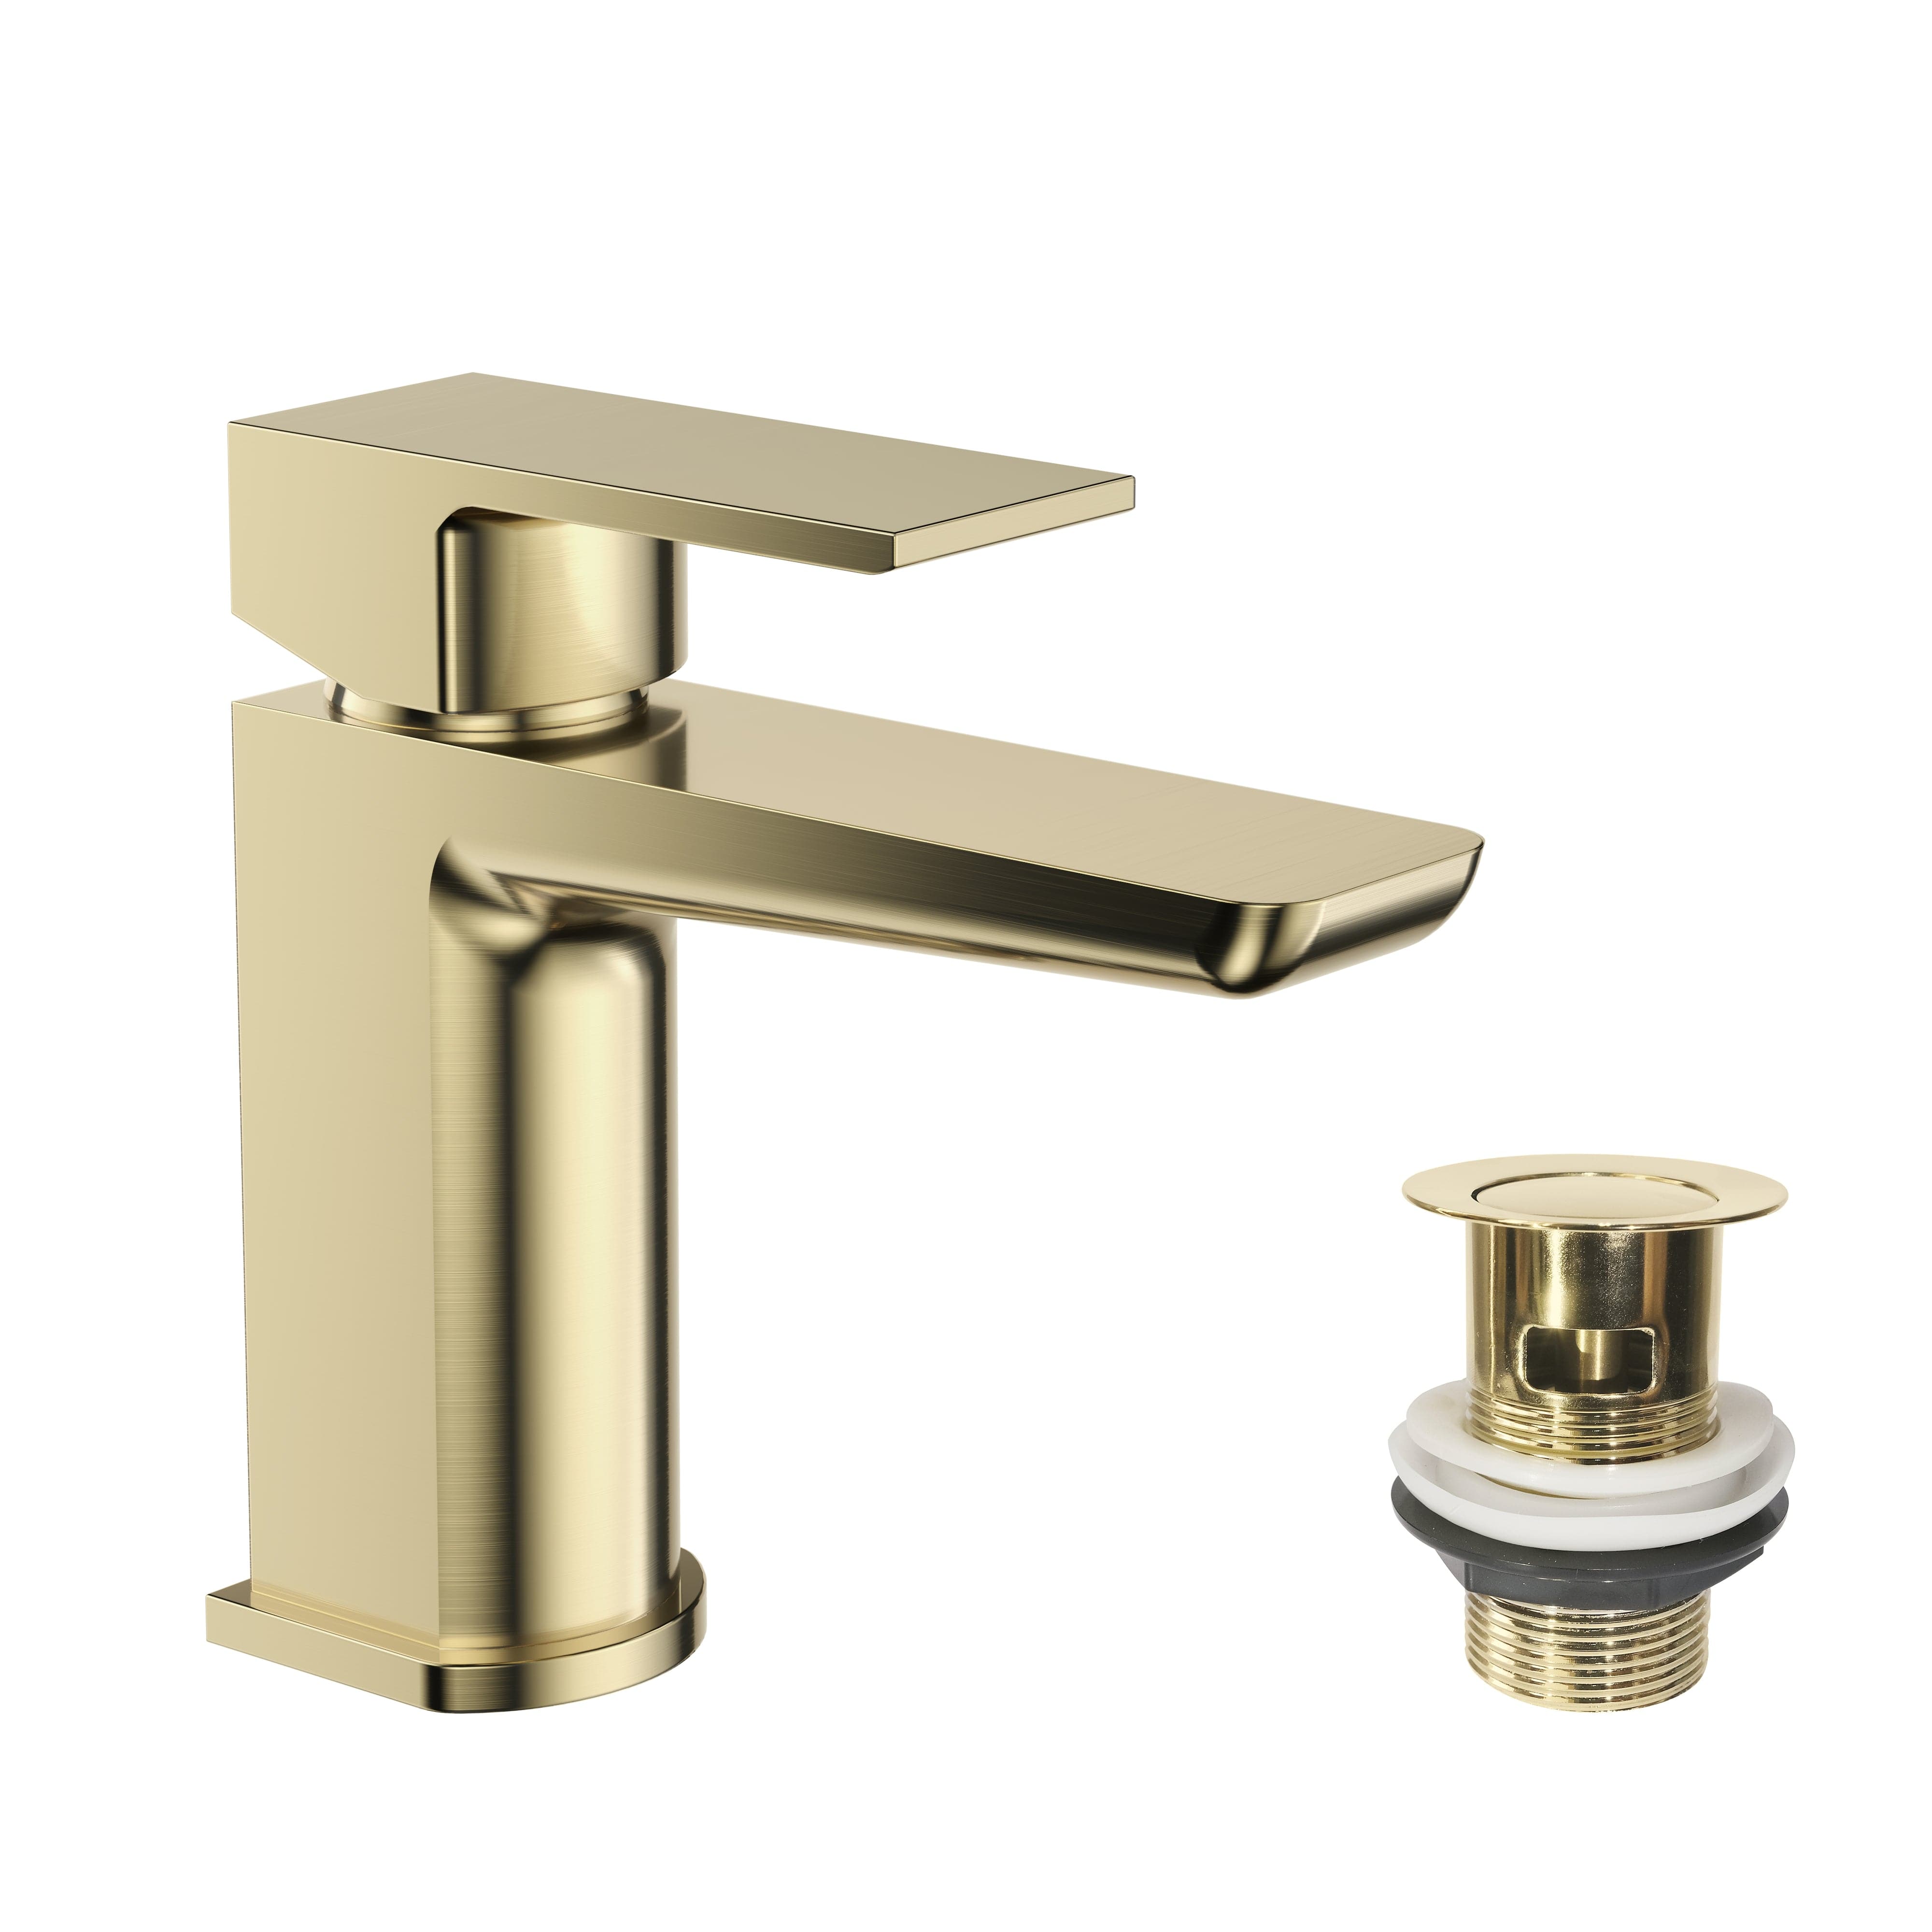 Lunar Soft Square Mono Basin Mixer Tap with Waste - Brushed Brass